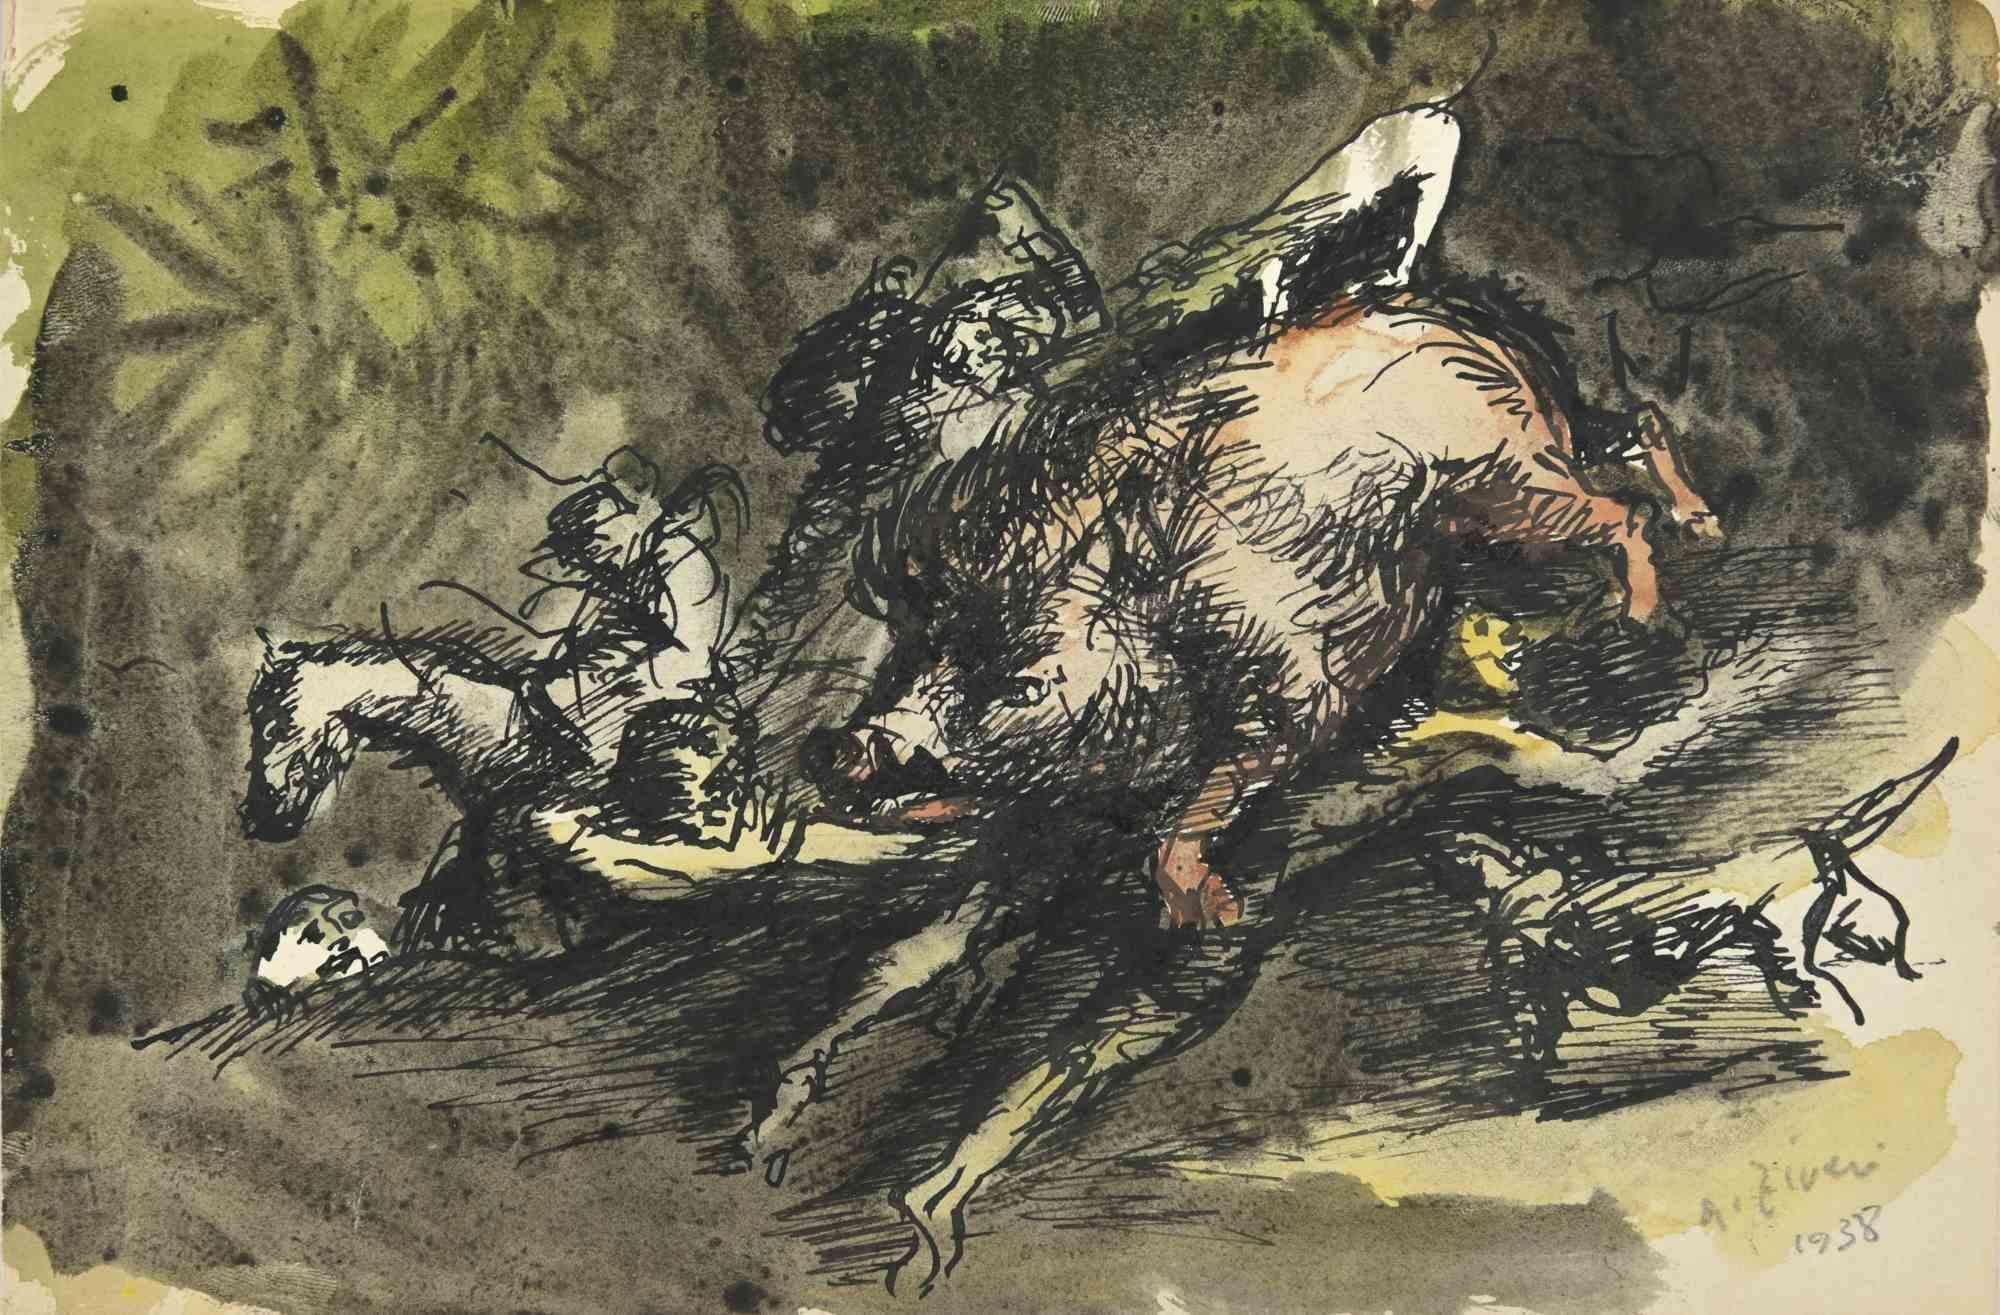 Hunting is a drawing realized by Alberto Ziveri in 1938.

Ink and Watercolor on paper.

Hand-signed and dated.

In good conditions.

The artwork is represented through deft strokes masterly.

Alberto Ziveri (Rome,1908 – 1990), the Italian painter of